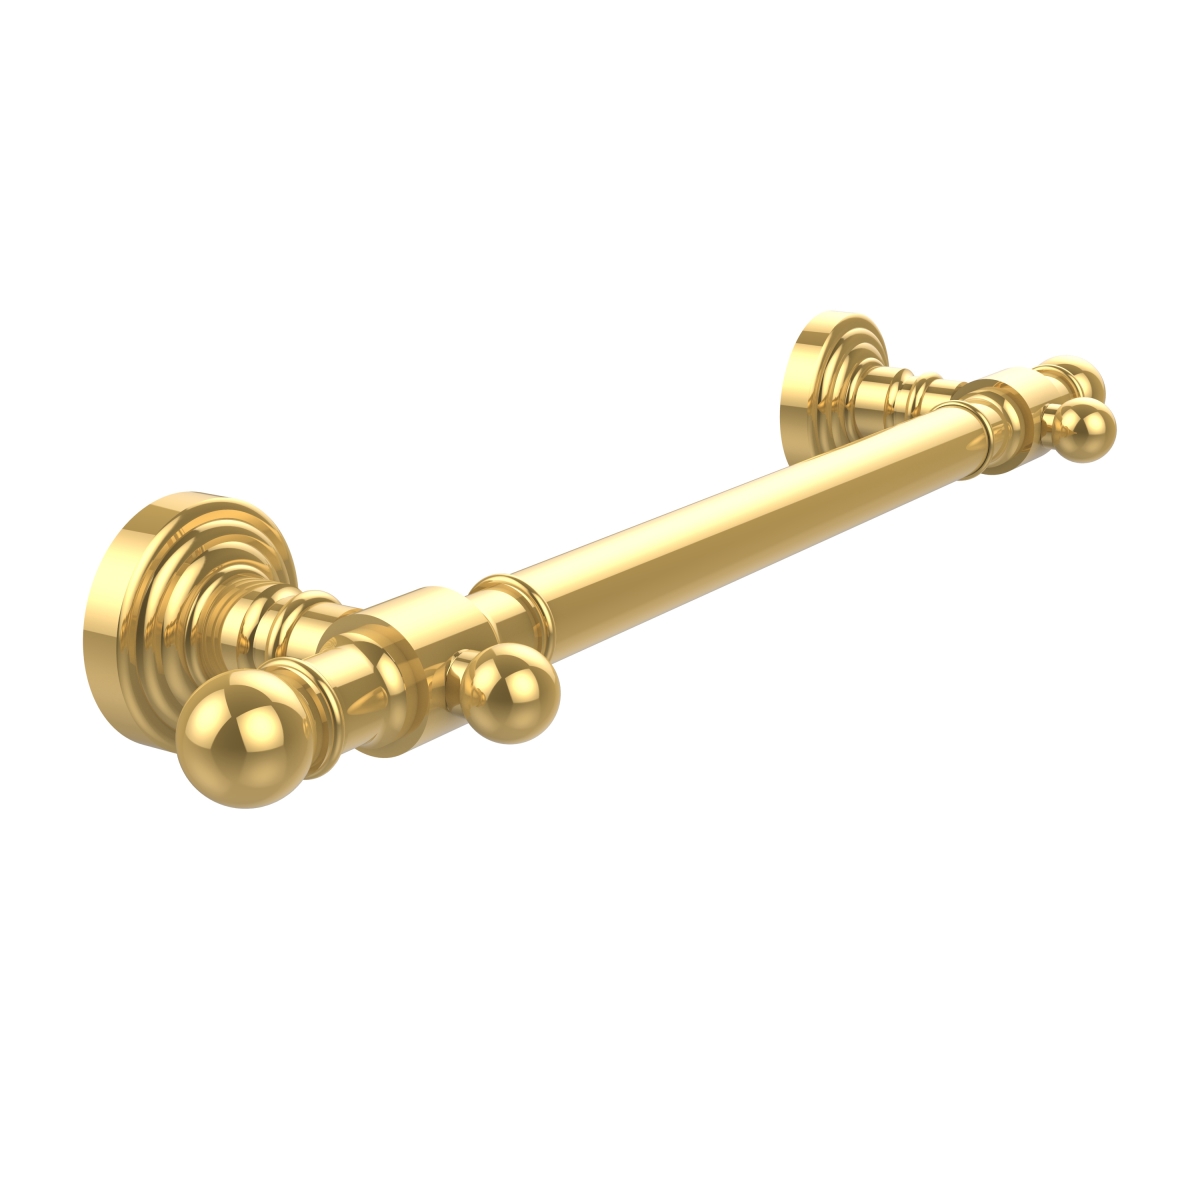 Picture of Allied Brass WP-GRS-16-PB 16 in. Grab Bar Smooth, Polished Brass - 3.5 x 22 x 16 in.